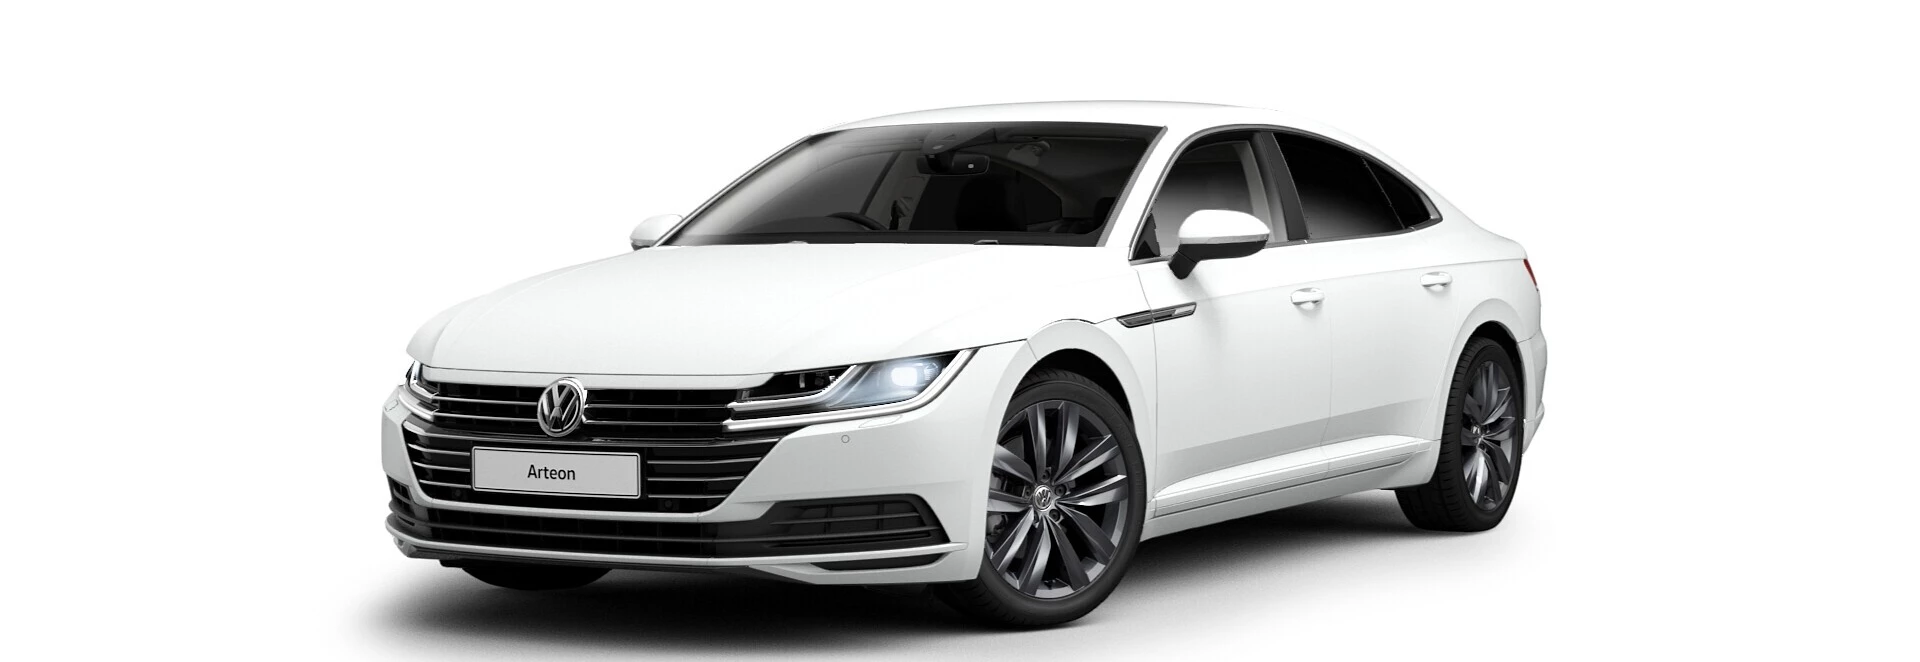 New entry-level 2020 Volkswagen Arteon will be even more affordable 